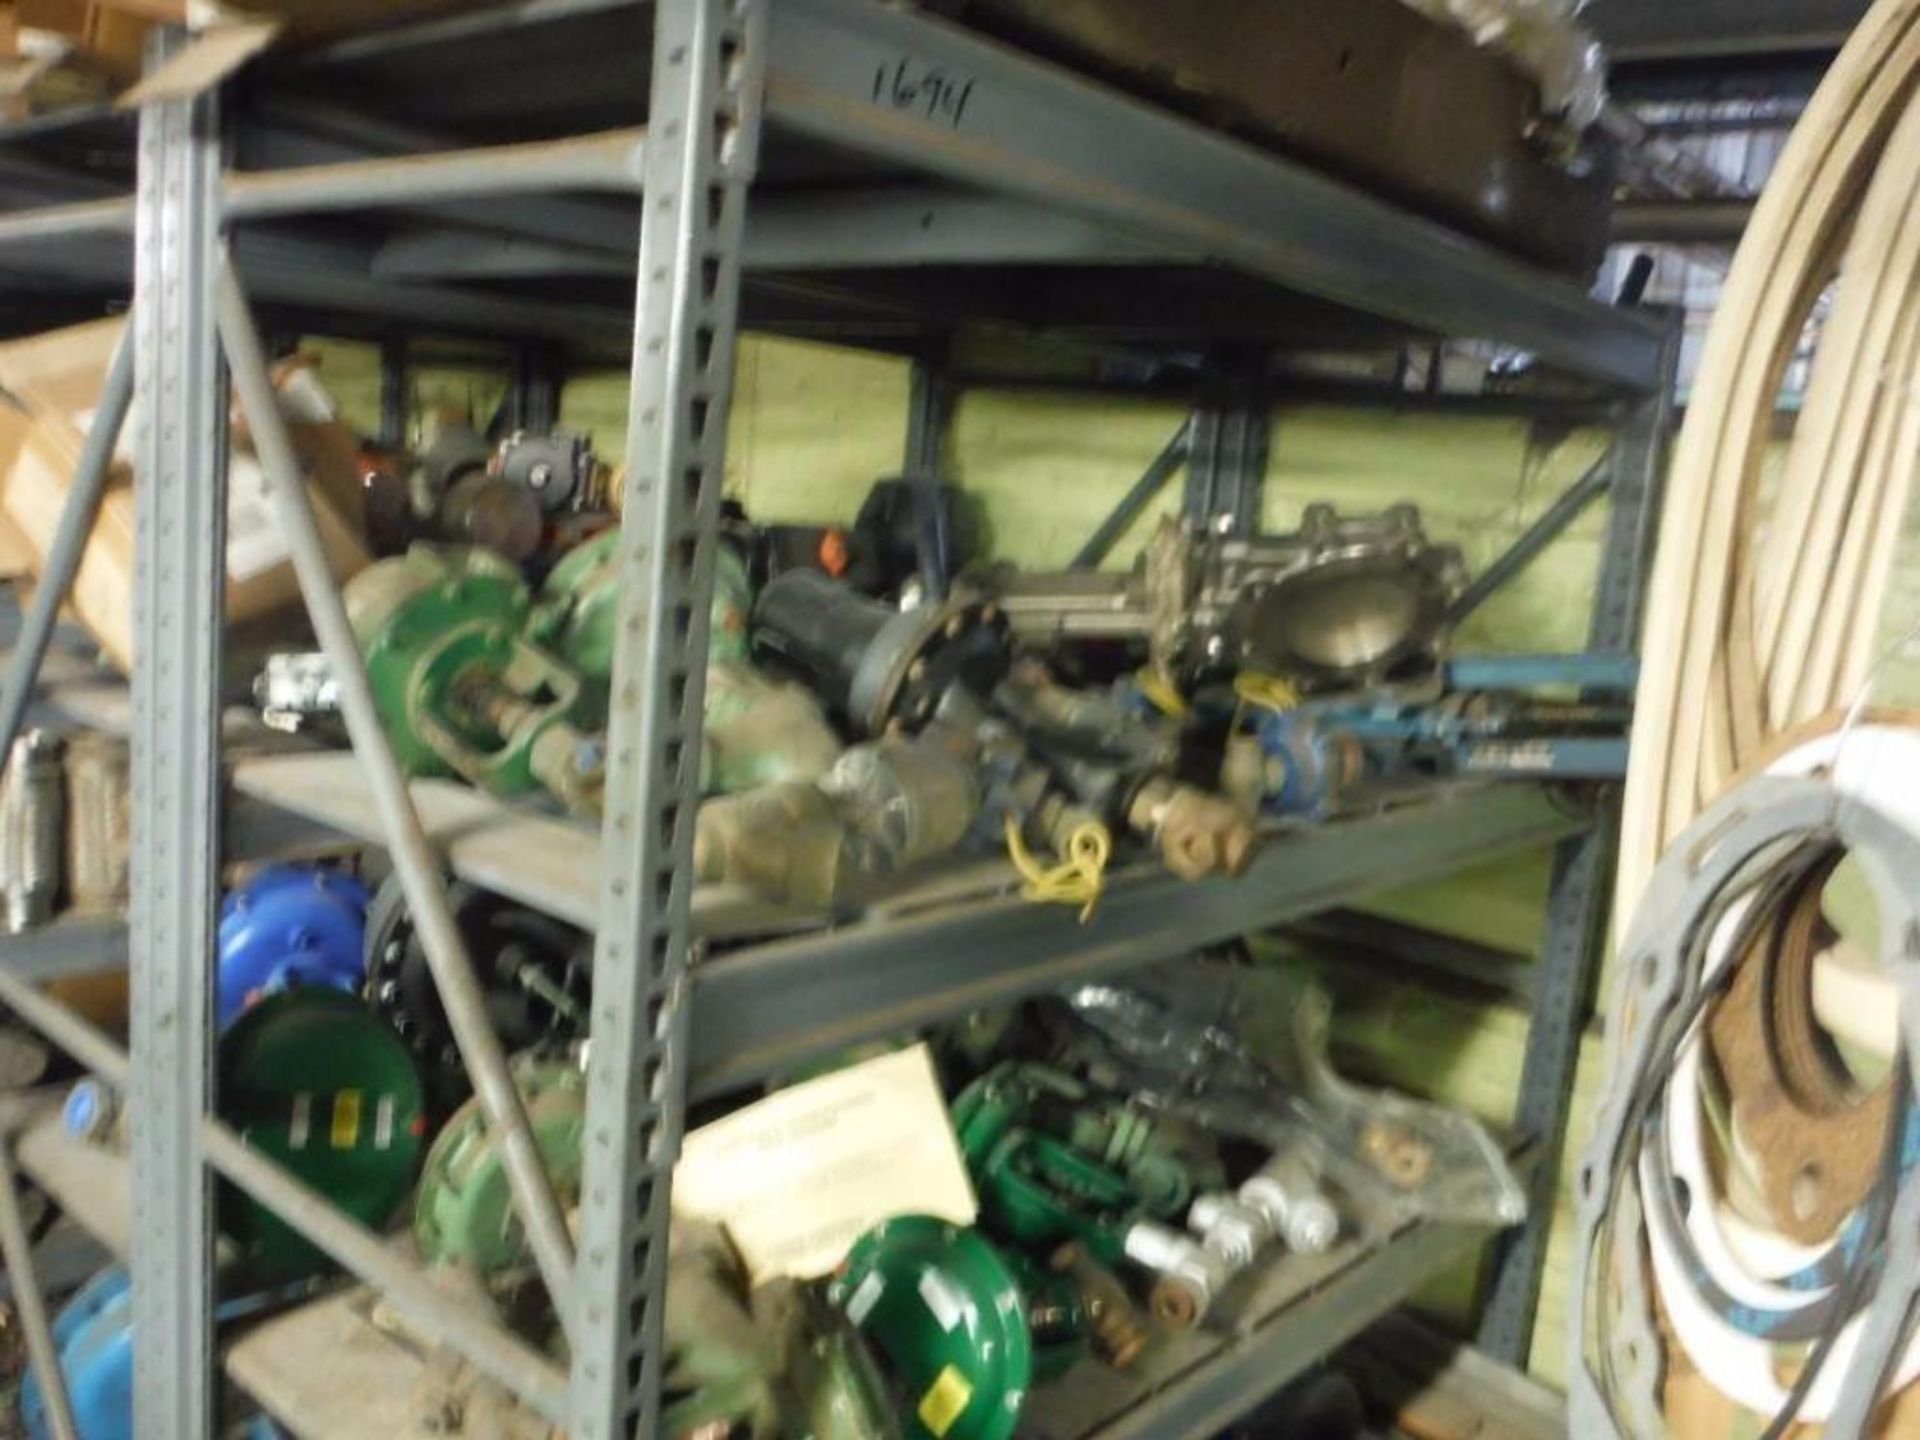 10 Shelves & content: Miscellaneous valves, fittings, brushes, and parts  Rigging Fee: $1000 - Image 9 of 14